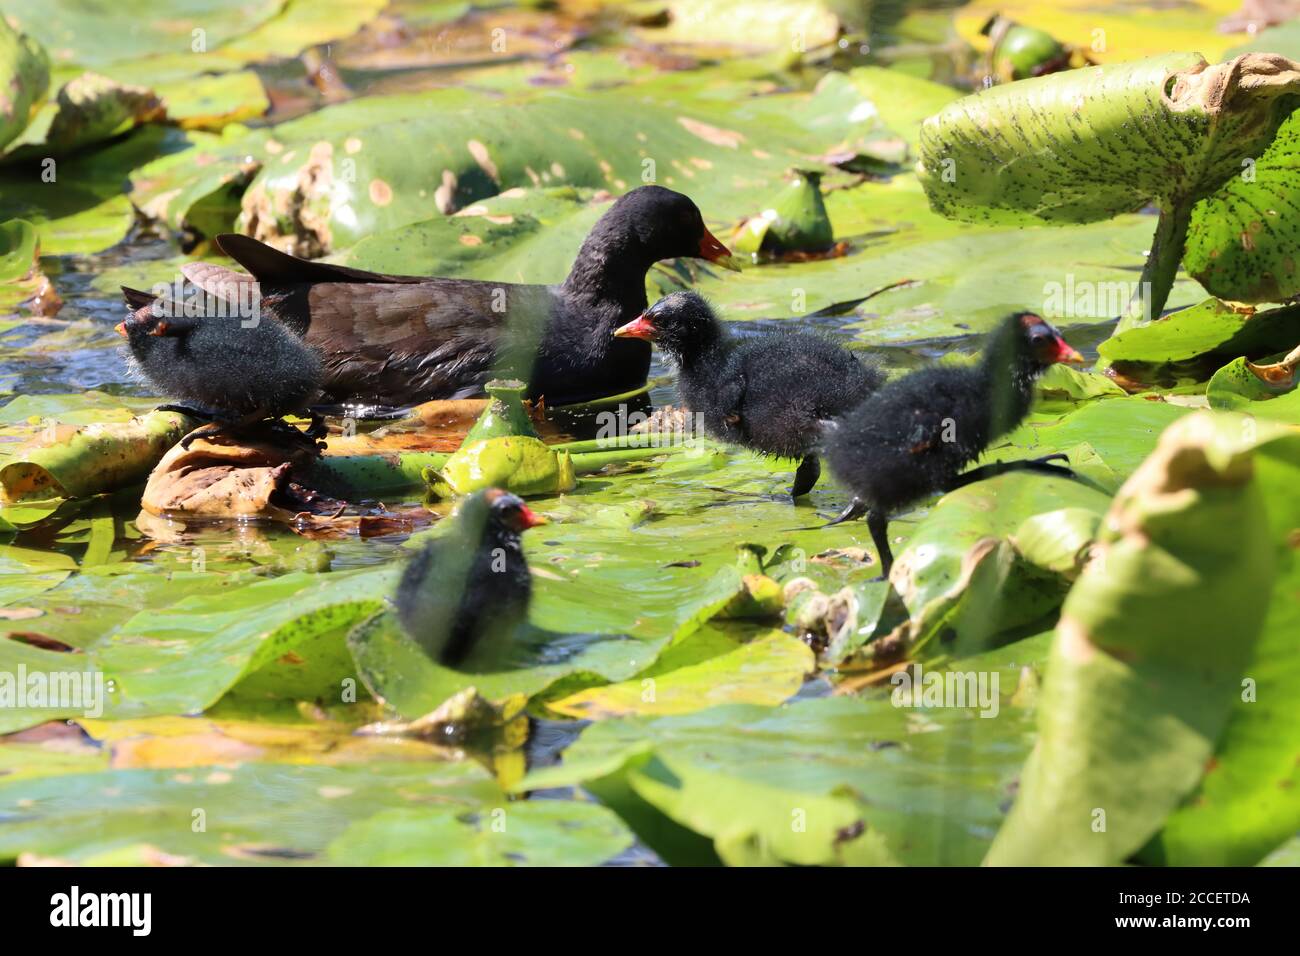 Moorhen with its chicks walking on Lilly pads in a pond, County Durham, England, UK Stock Photo